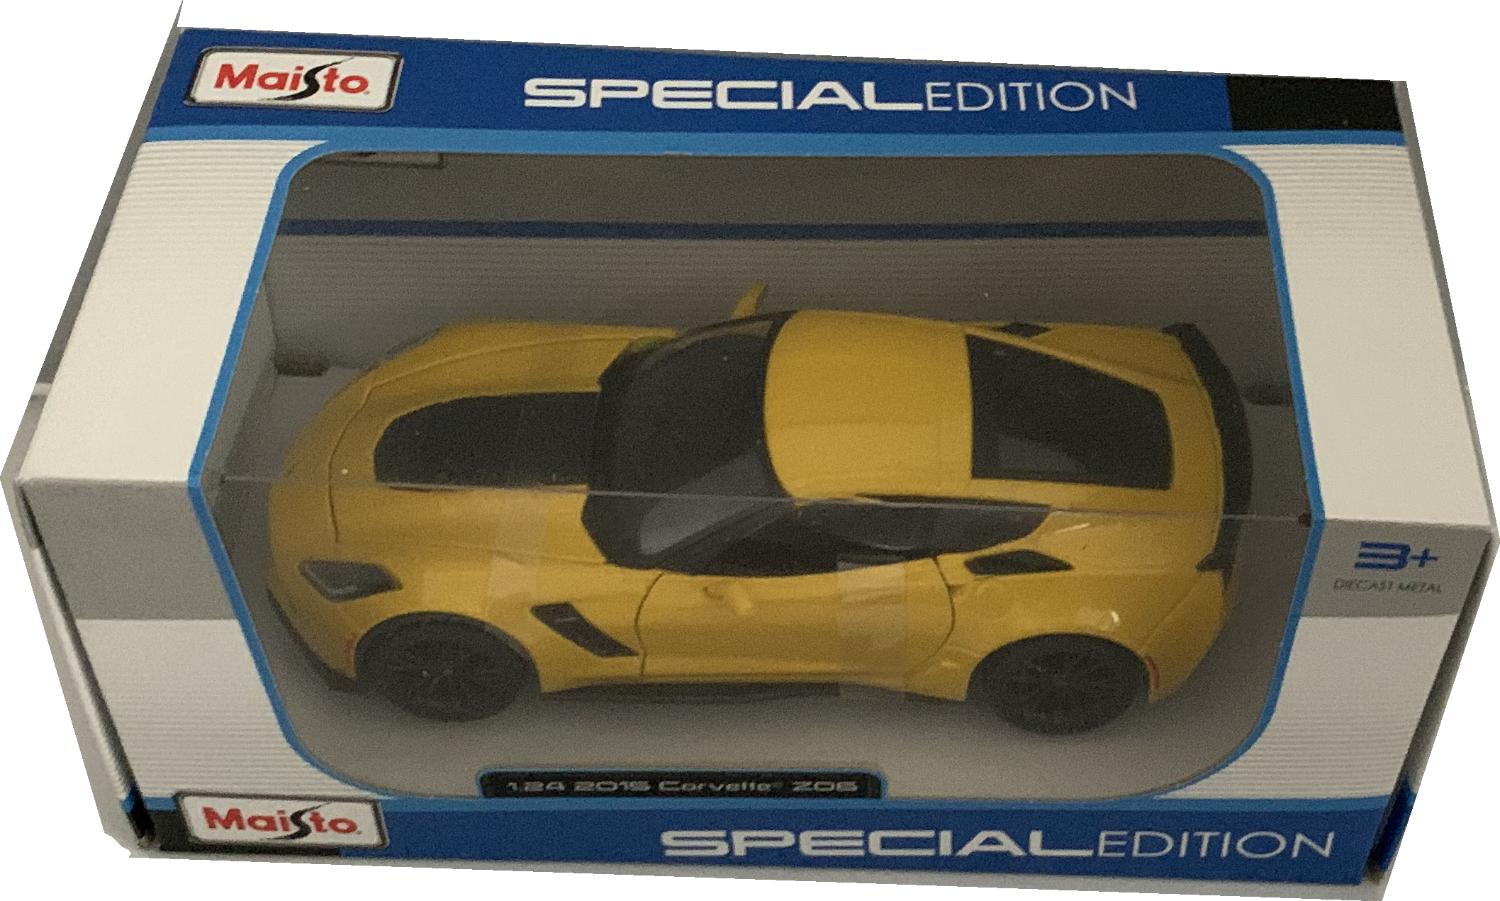 An excellent scale model of a Chevrolet Corvette Z06 decorated in yellow with black wheels